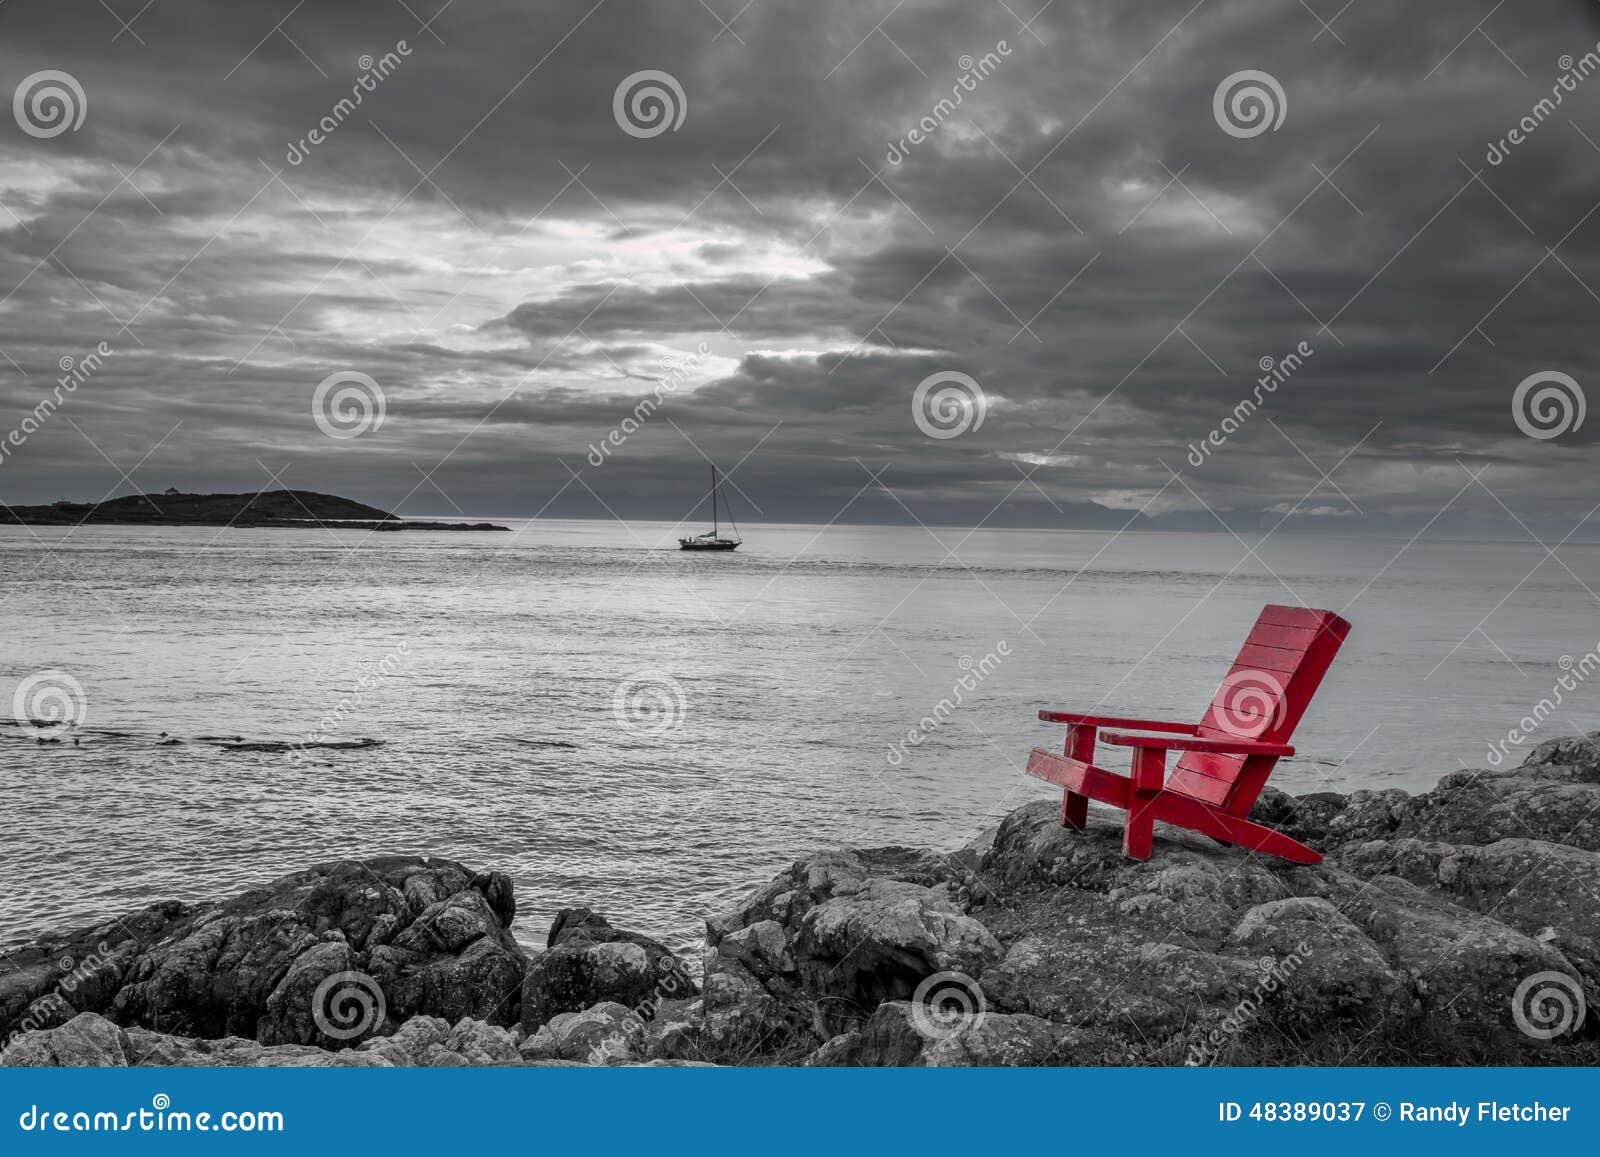 red Adirondack chair contrasts with a stormy black and white ocean 